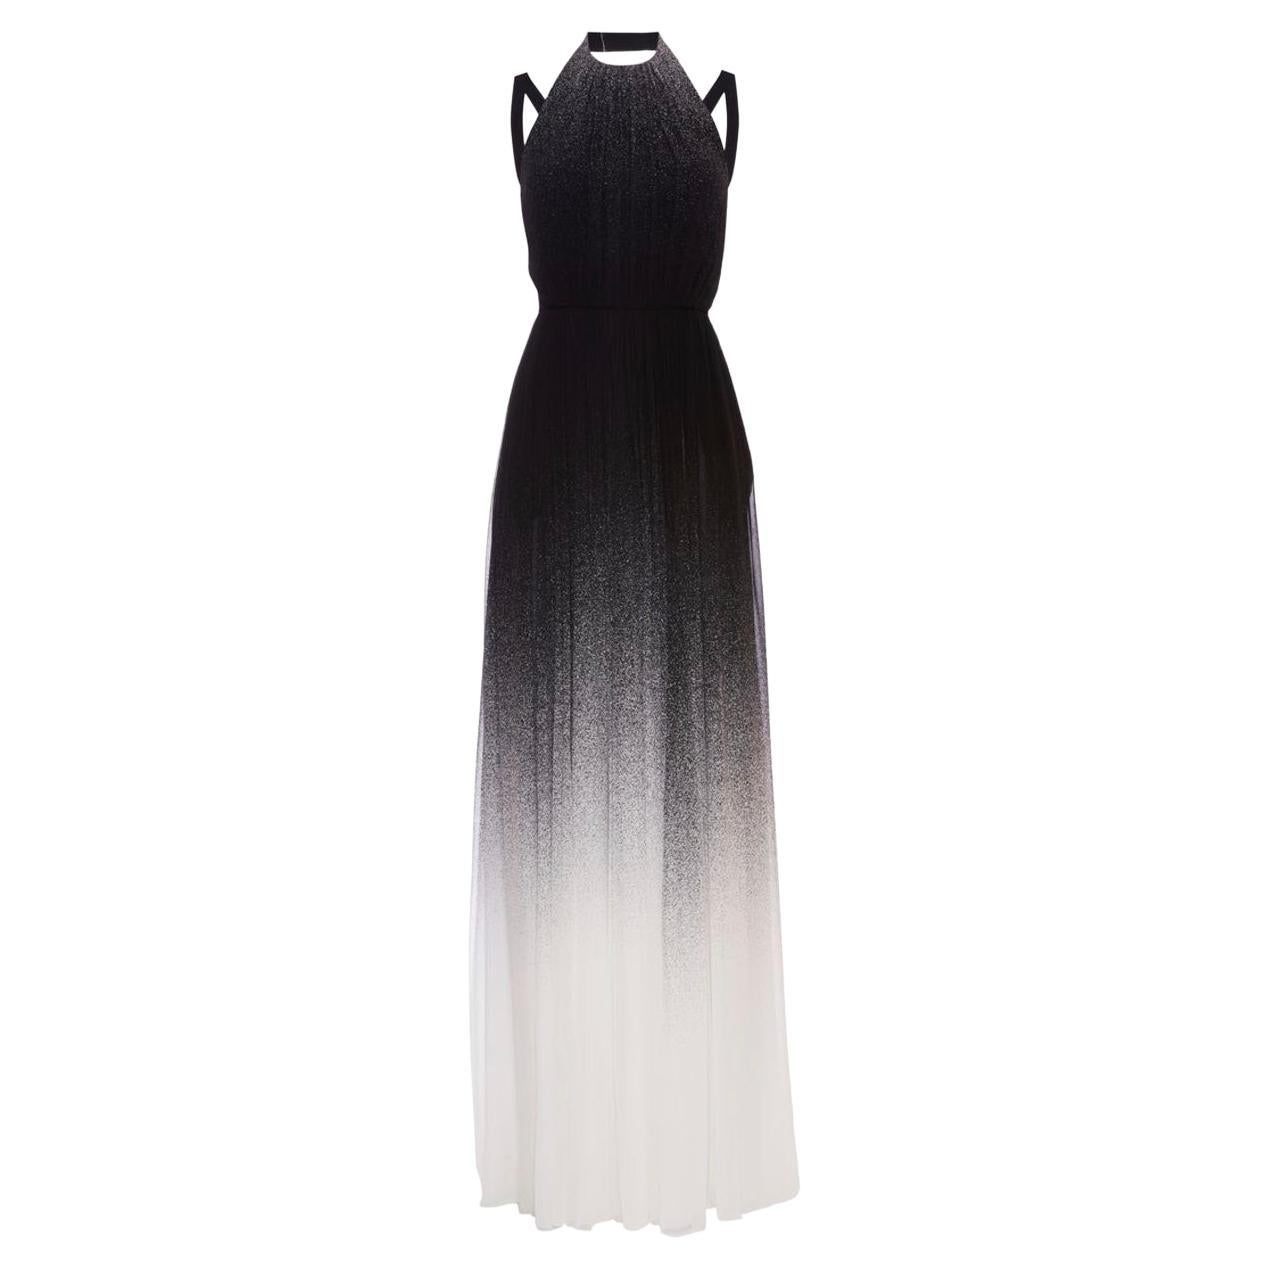 An Early 2000s Elie Saab Jersey Evening Dress at 1stDibs